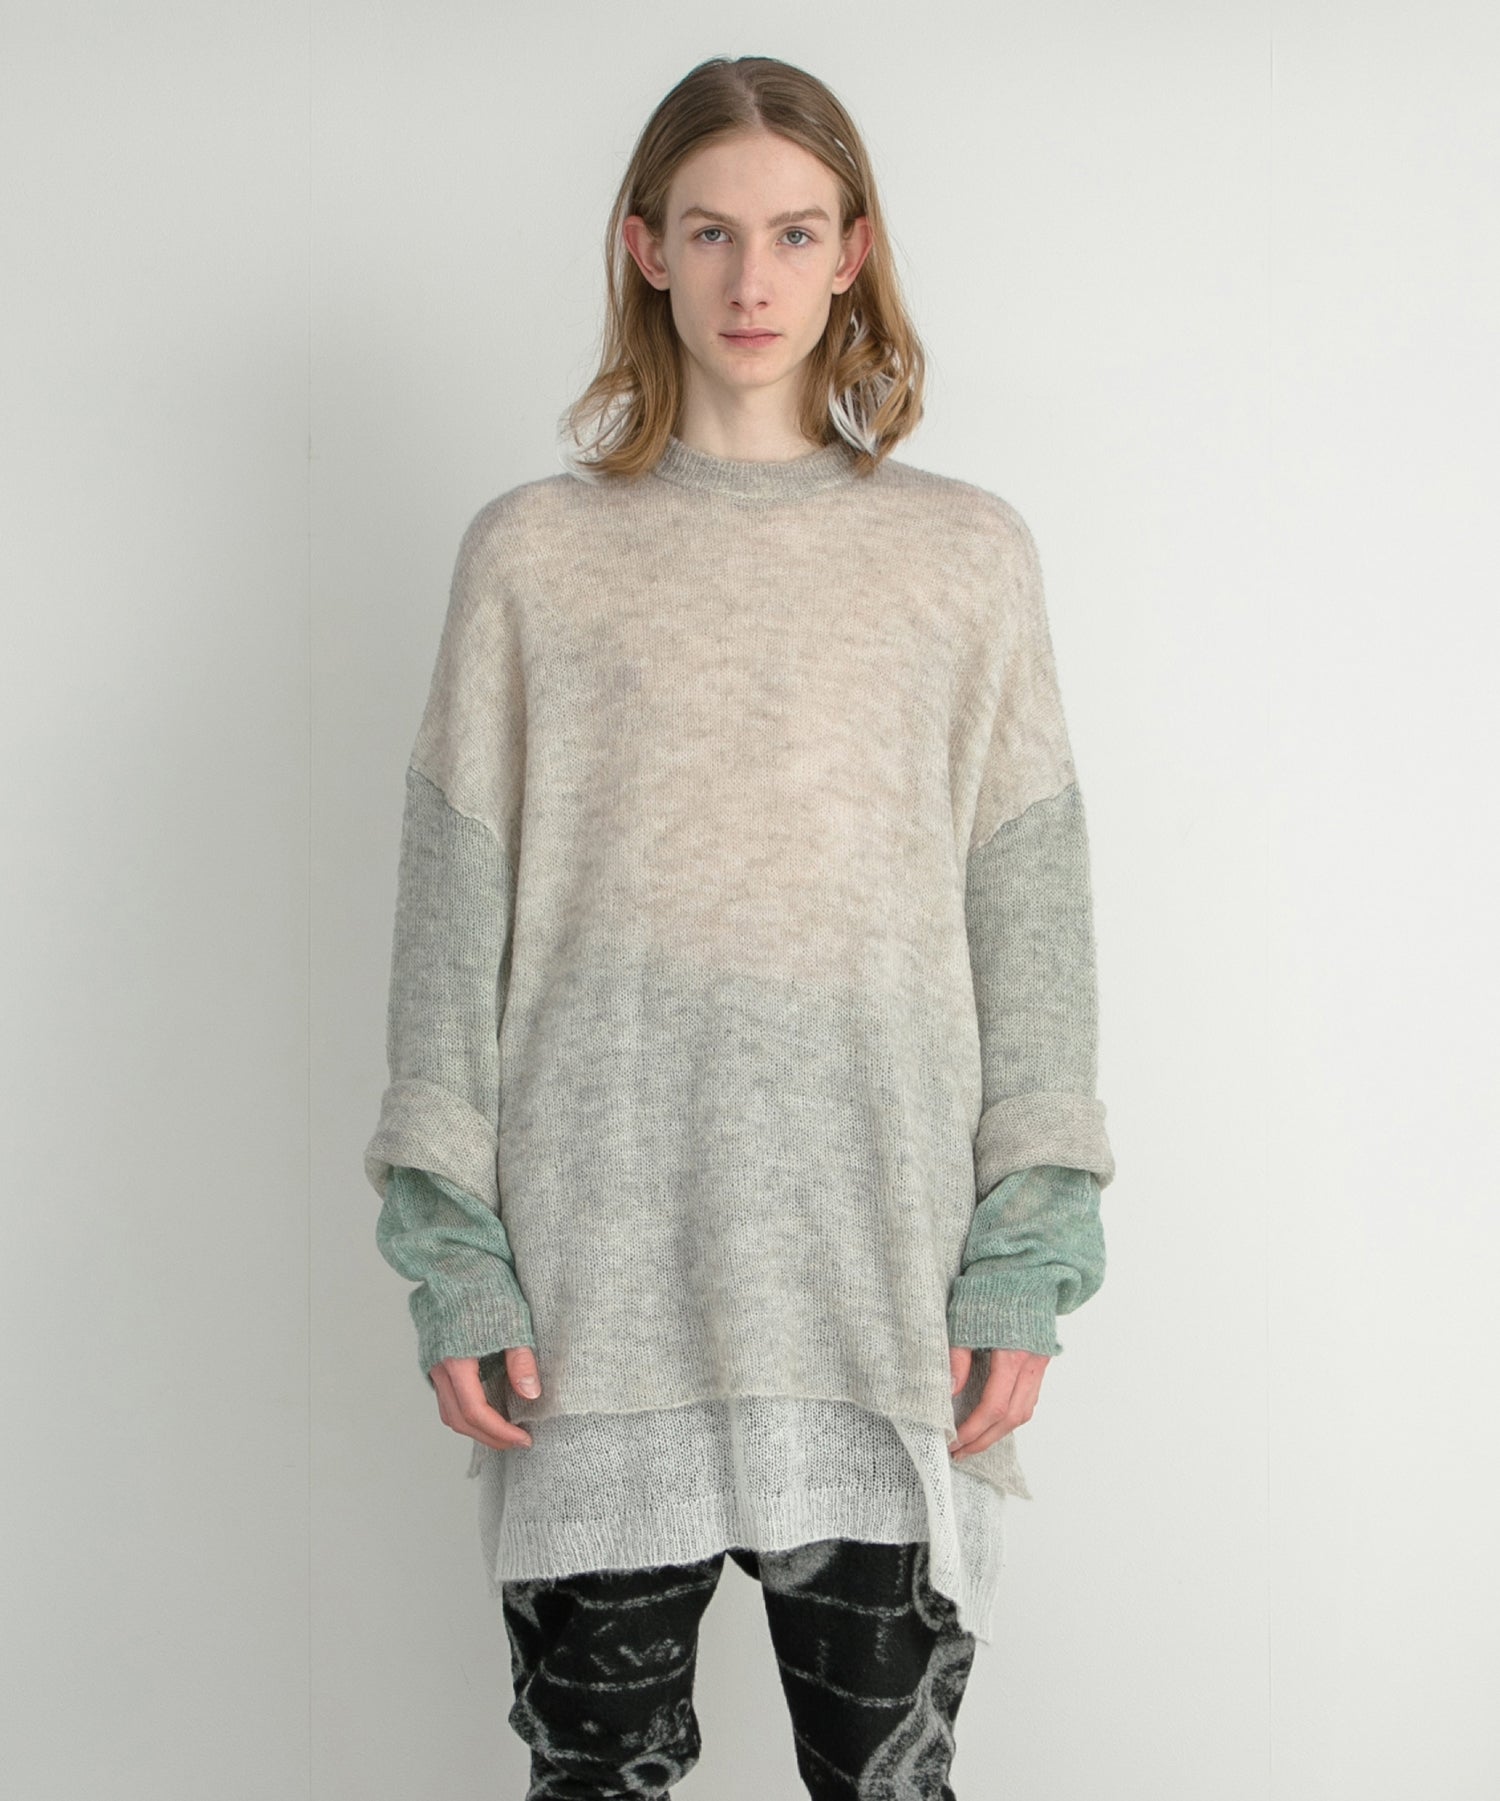 Mohair Color Layer Knit Sweater 【納期8月下旬】 – ANLIO（アンリオ）